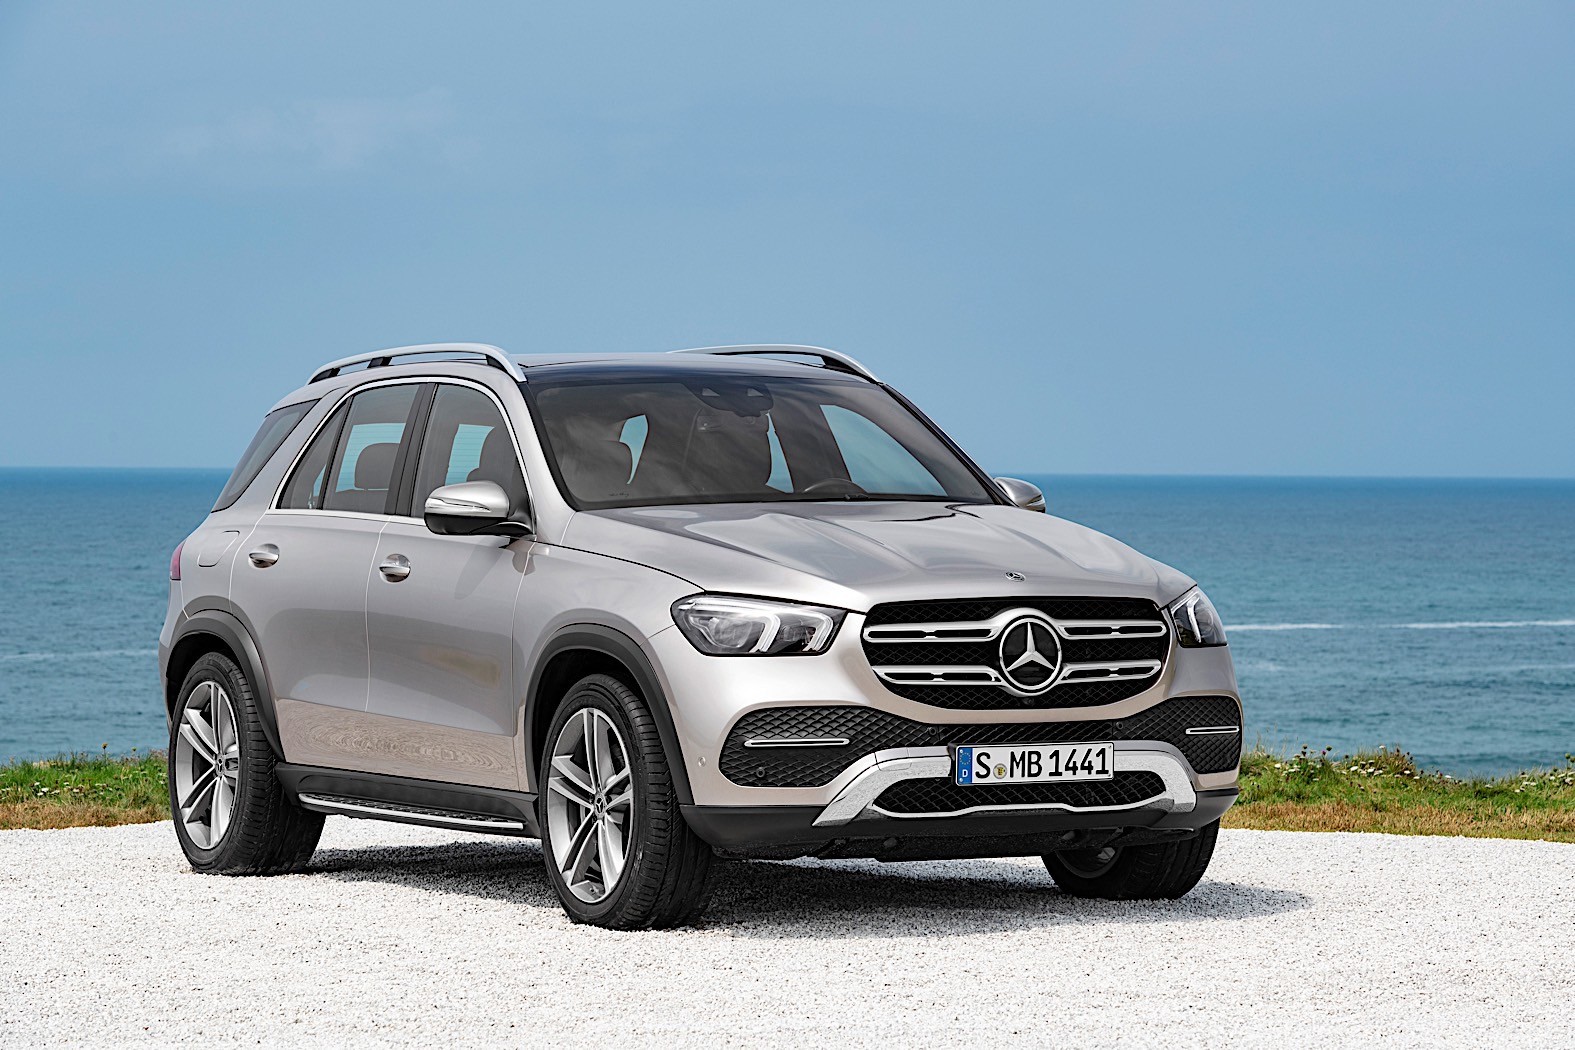 2019 MercedesBenz GLE Breaks Cover, Packed with